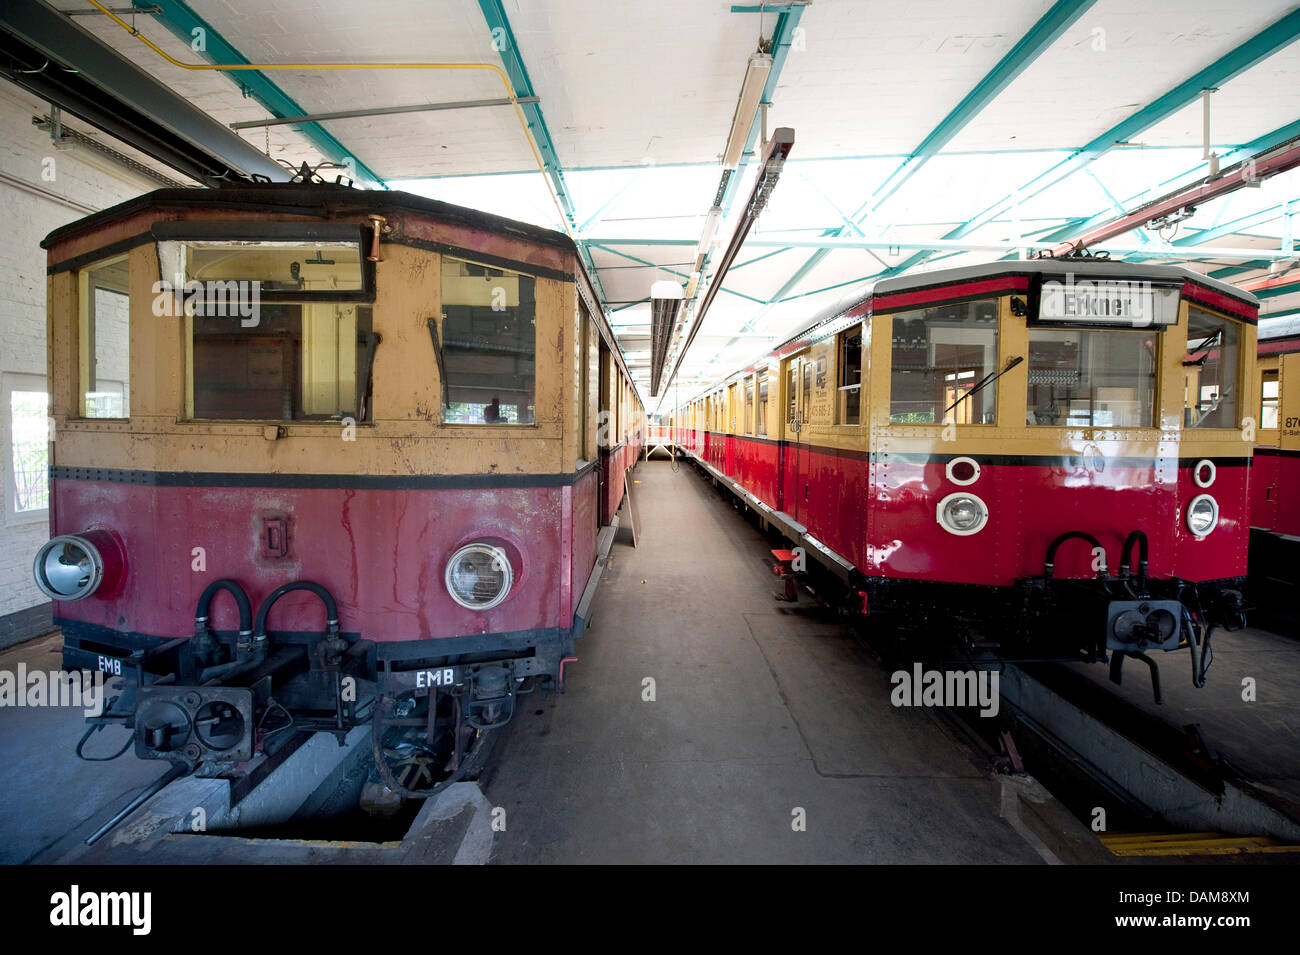 Historical s Bahn Train Inside Garage In erkner High Resolution Stock  Photography and Images - Alamy